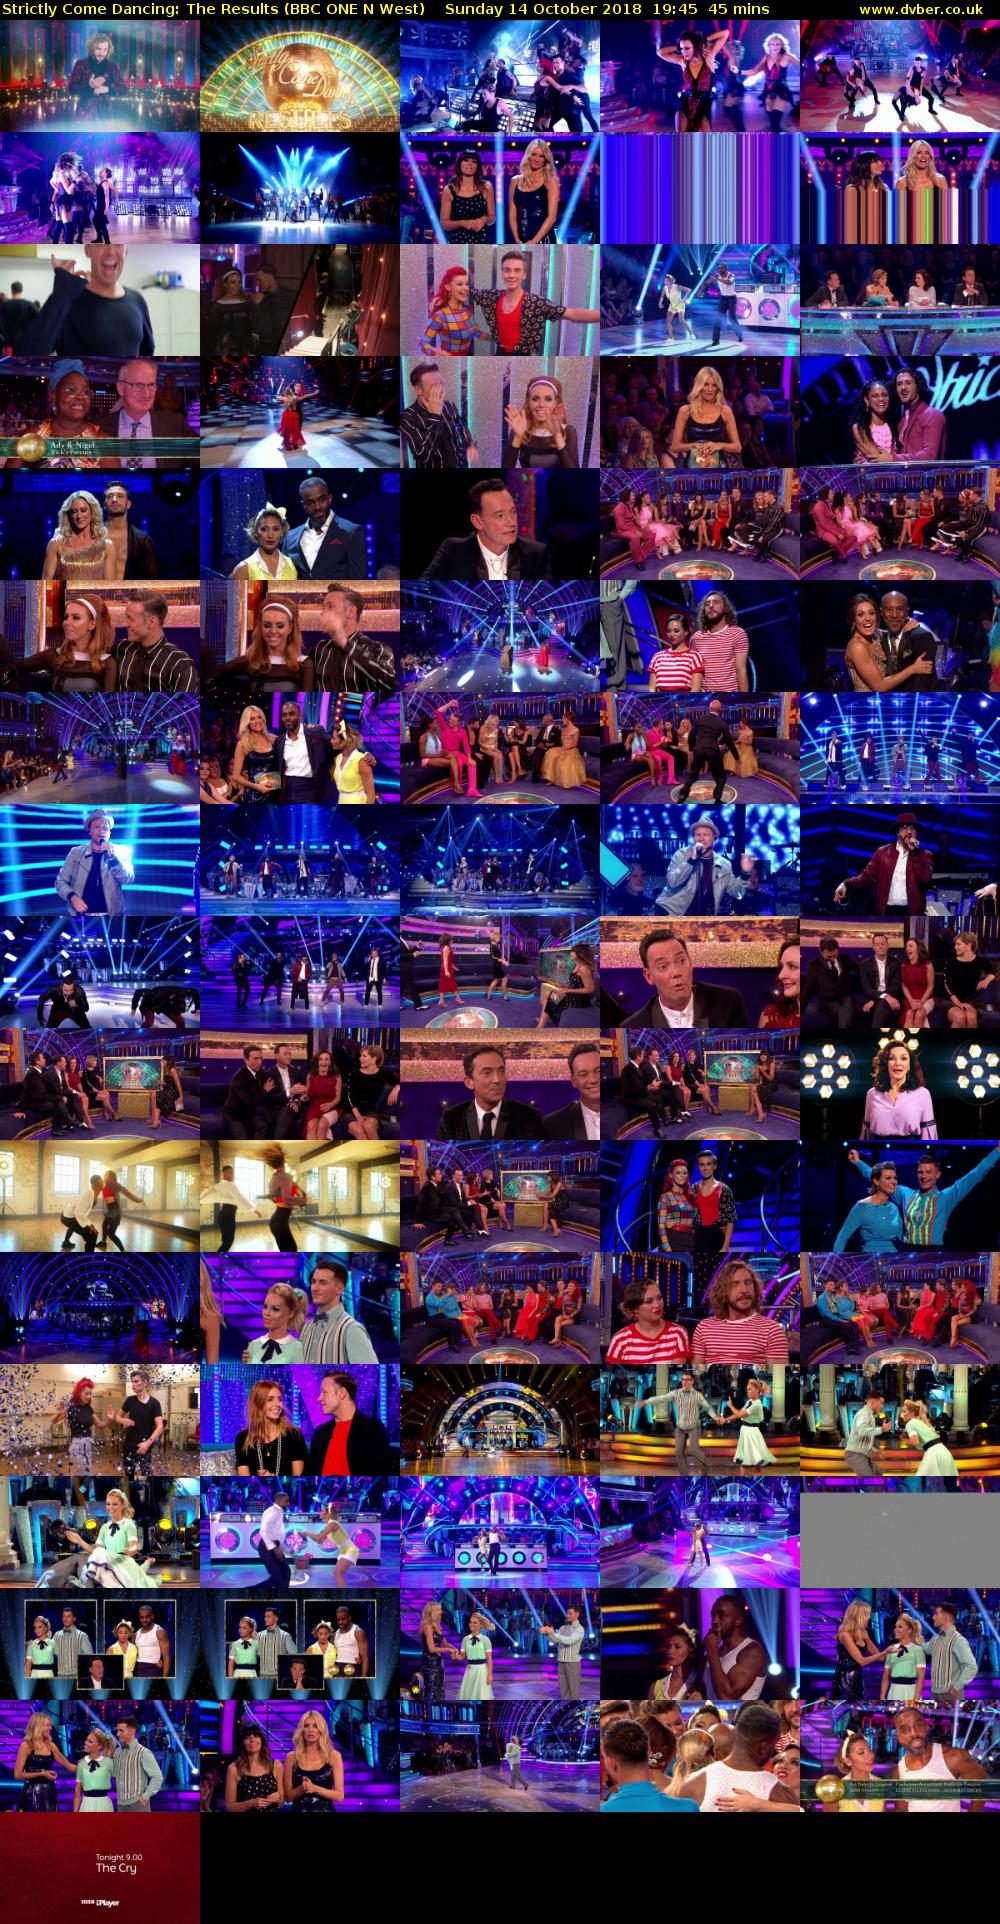 Strictly Come Dancing: The Results (BBC ONE N West) Sunday 14 October 2018 19:45 - 20:30